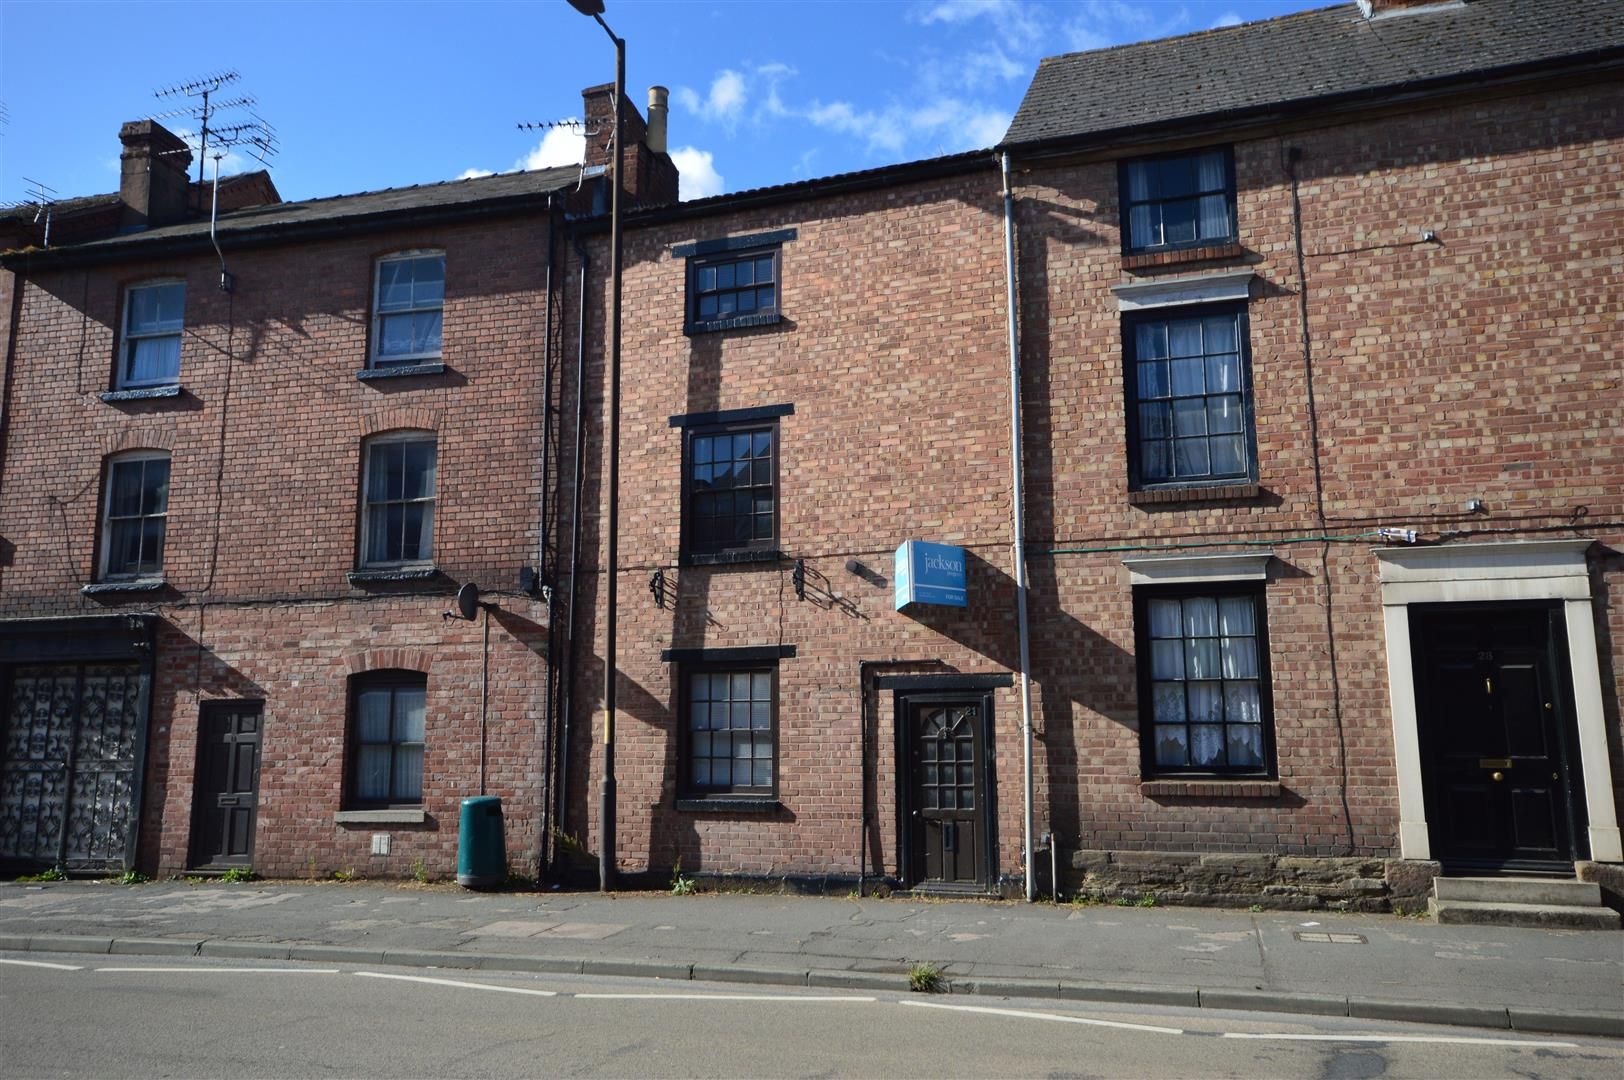 5 bed town house for sale in Leominster, HR6